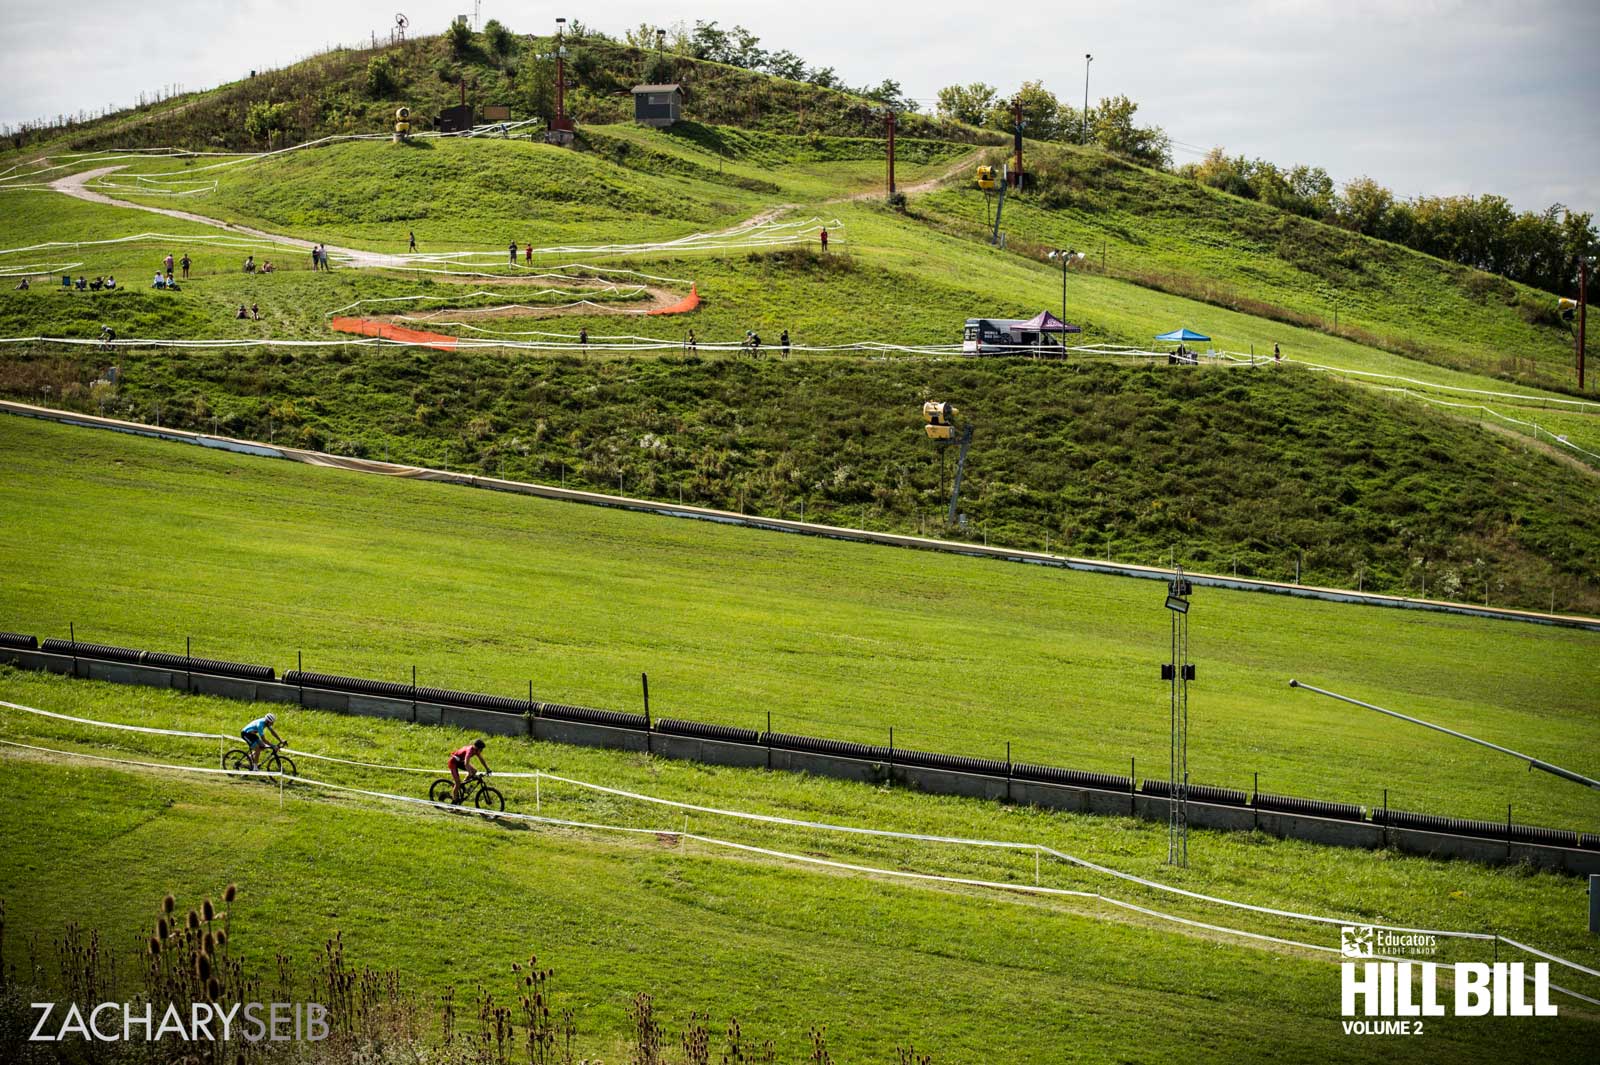 A profile of ski hill terrain that cyclocross racers are racing on.